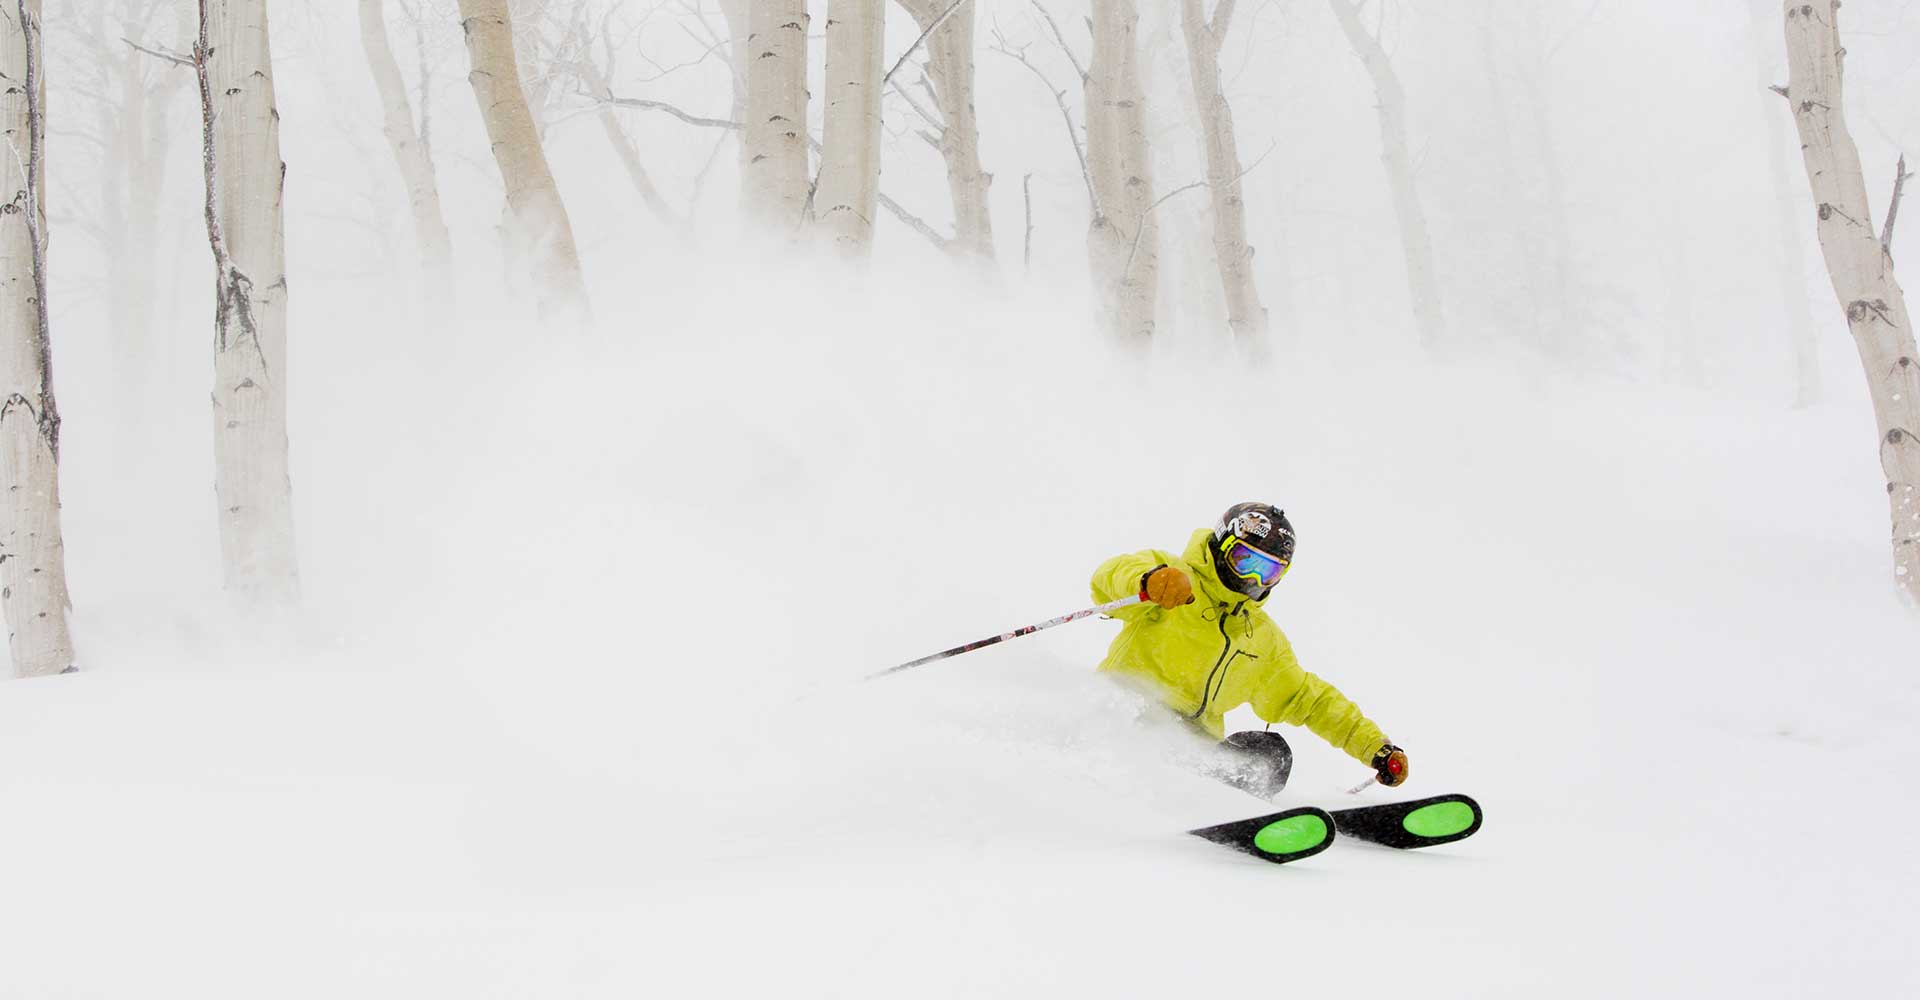 A skier emerges from the trees and powder at Aspen Snowmass